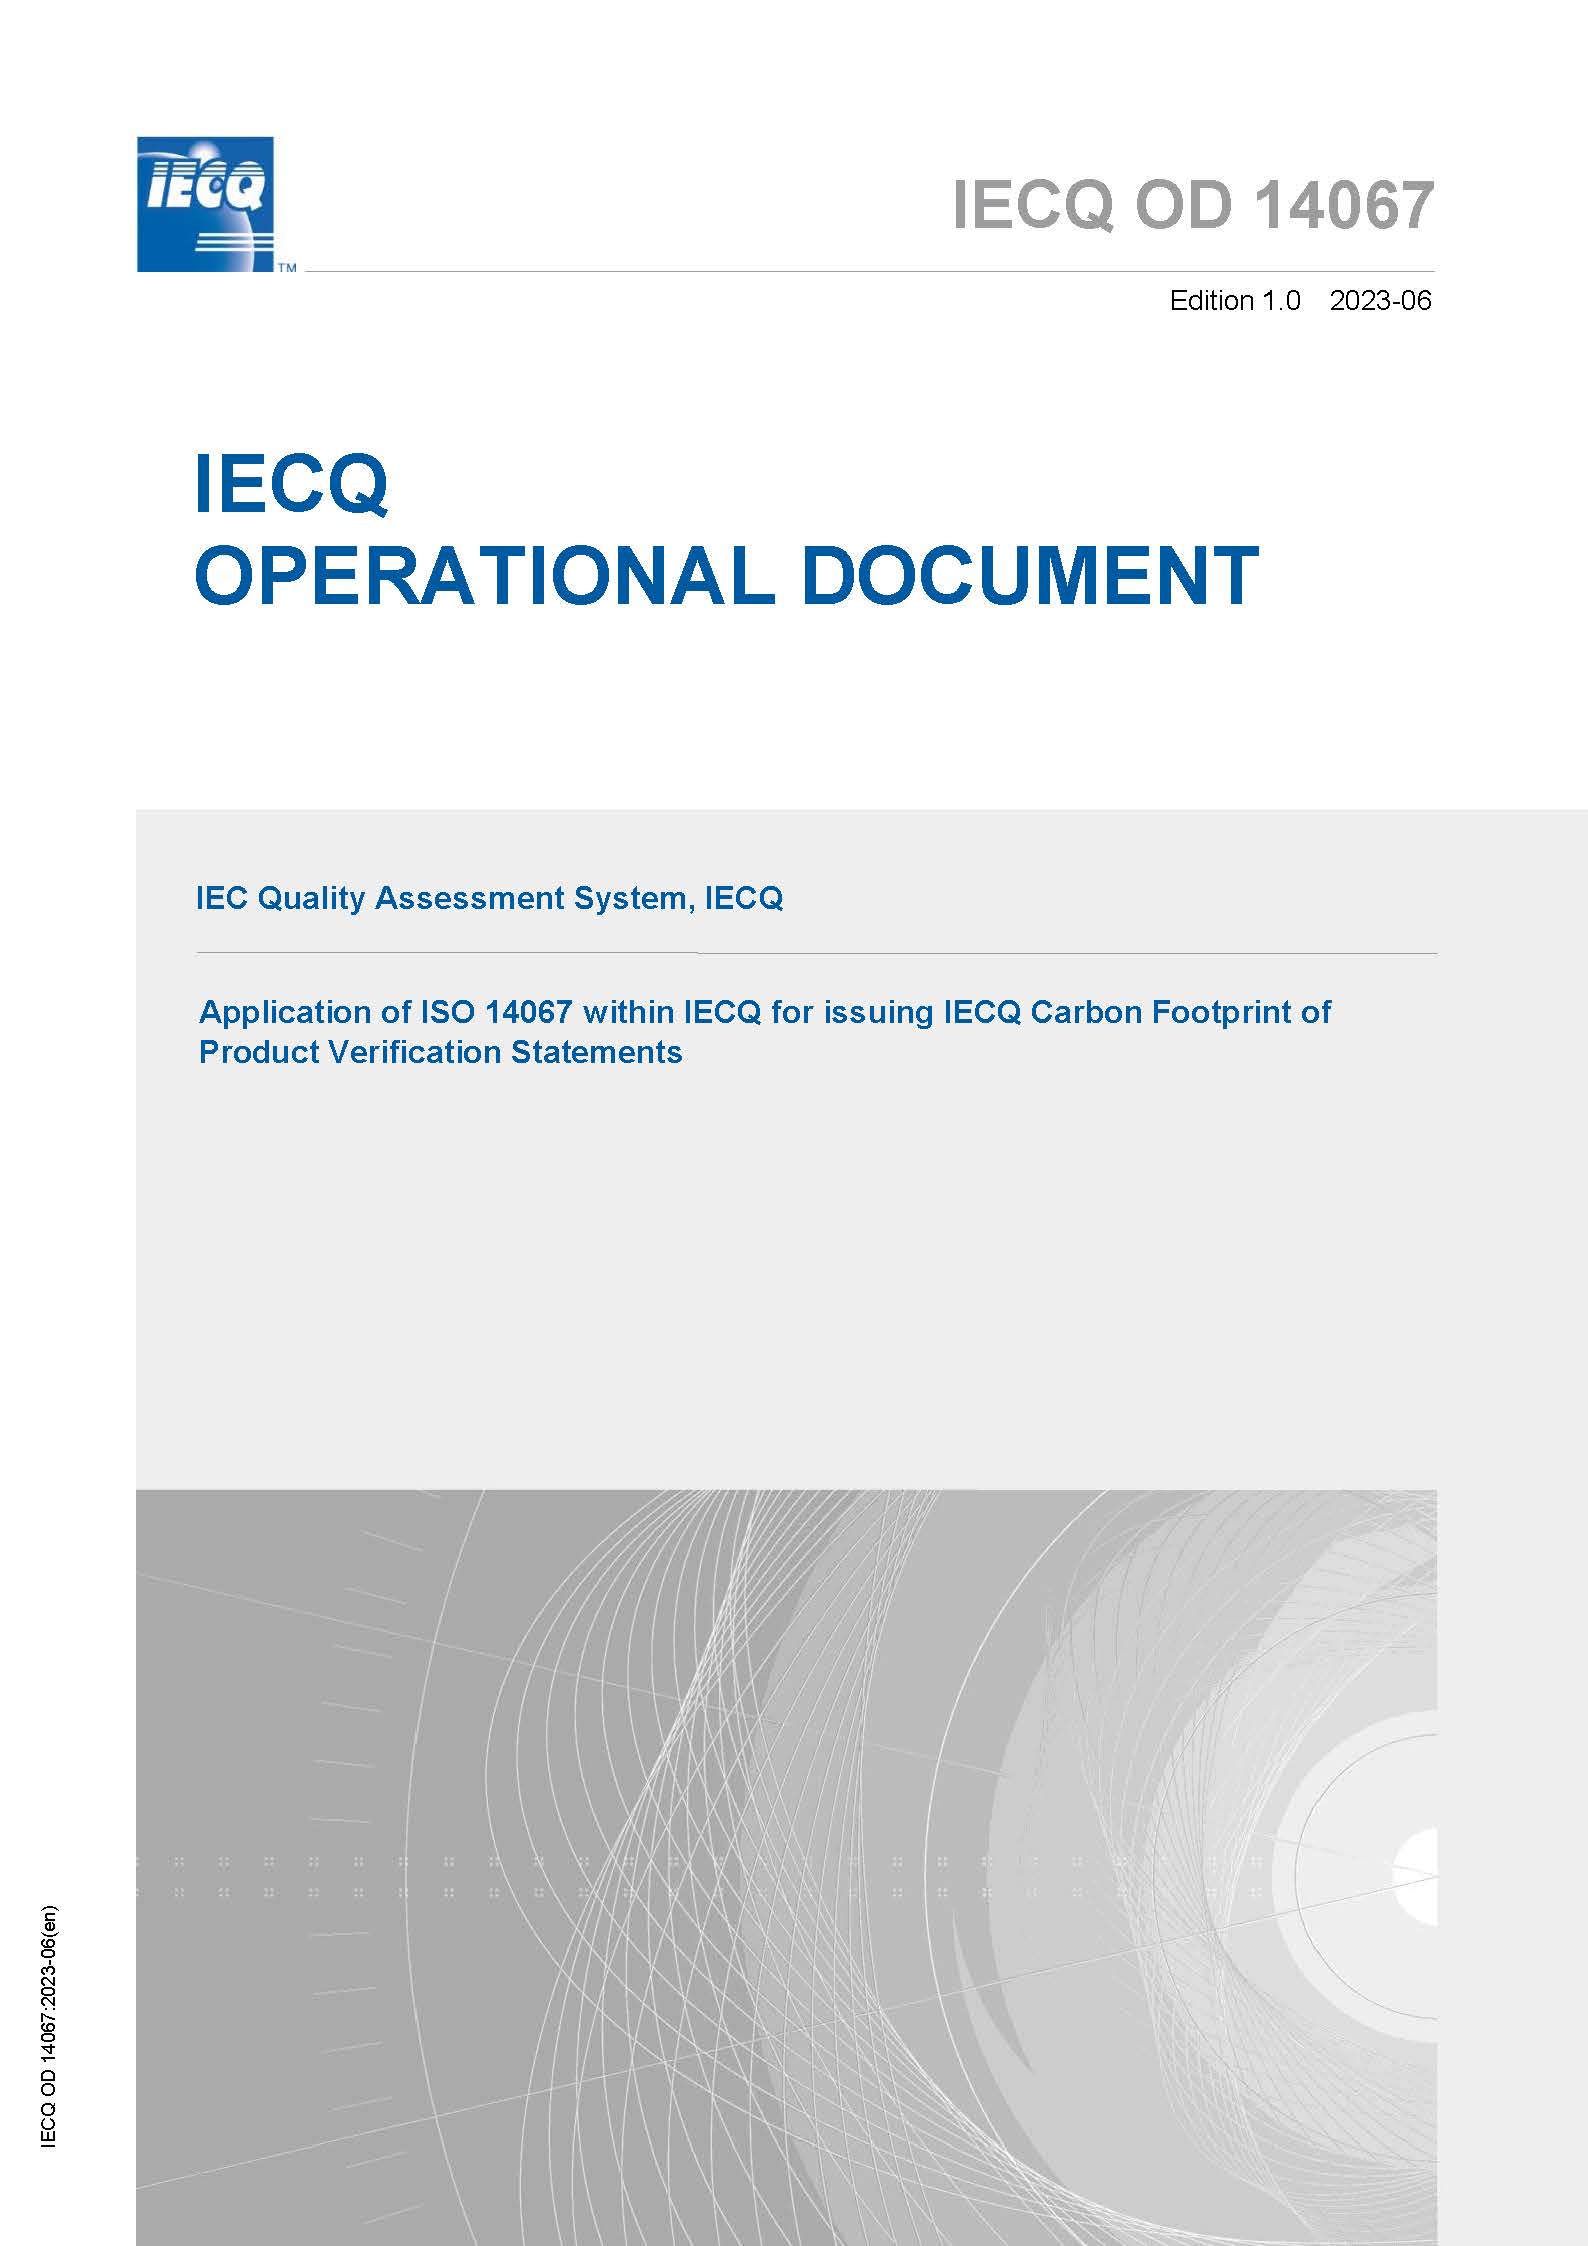 Operational Document - Application of ISO 14067 within IECQ for issuing IECQ Carbon Footprint of Product Verification Statements